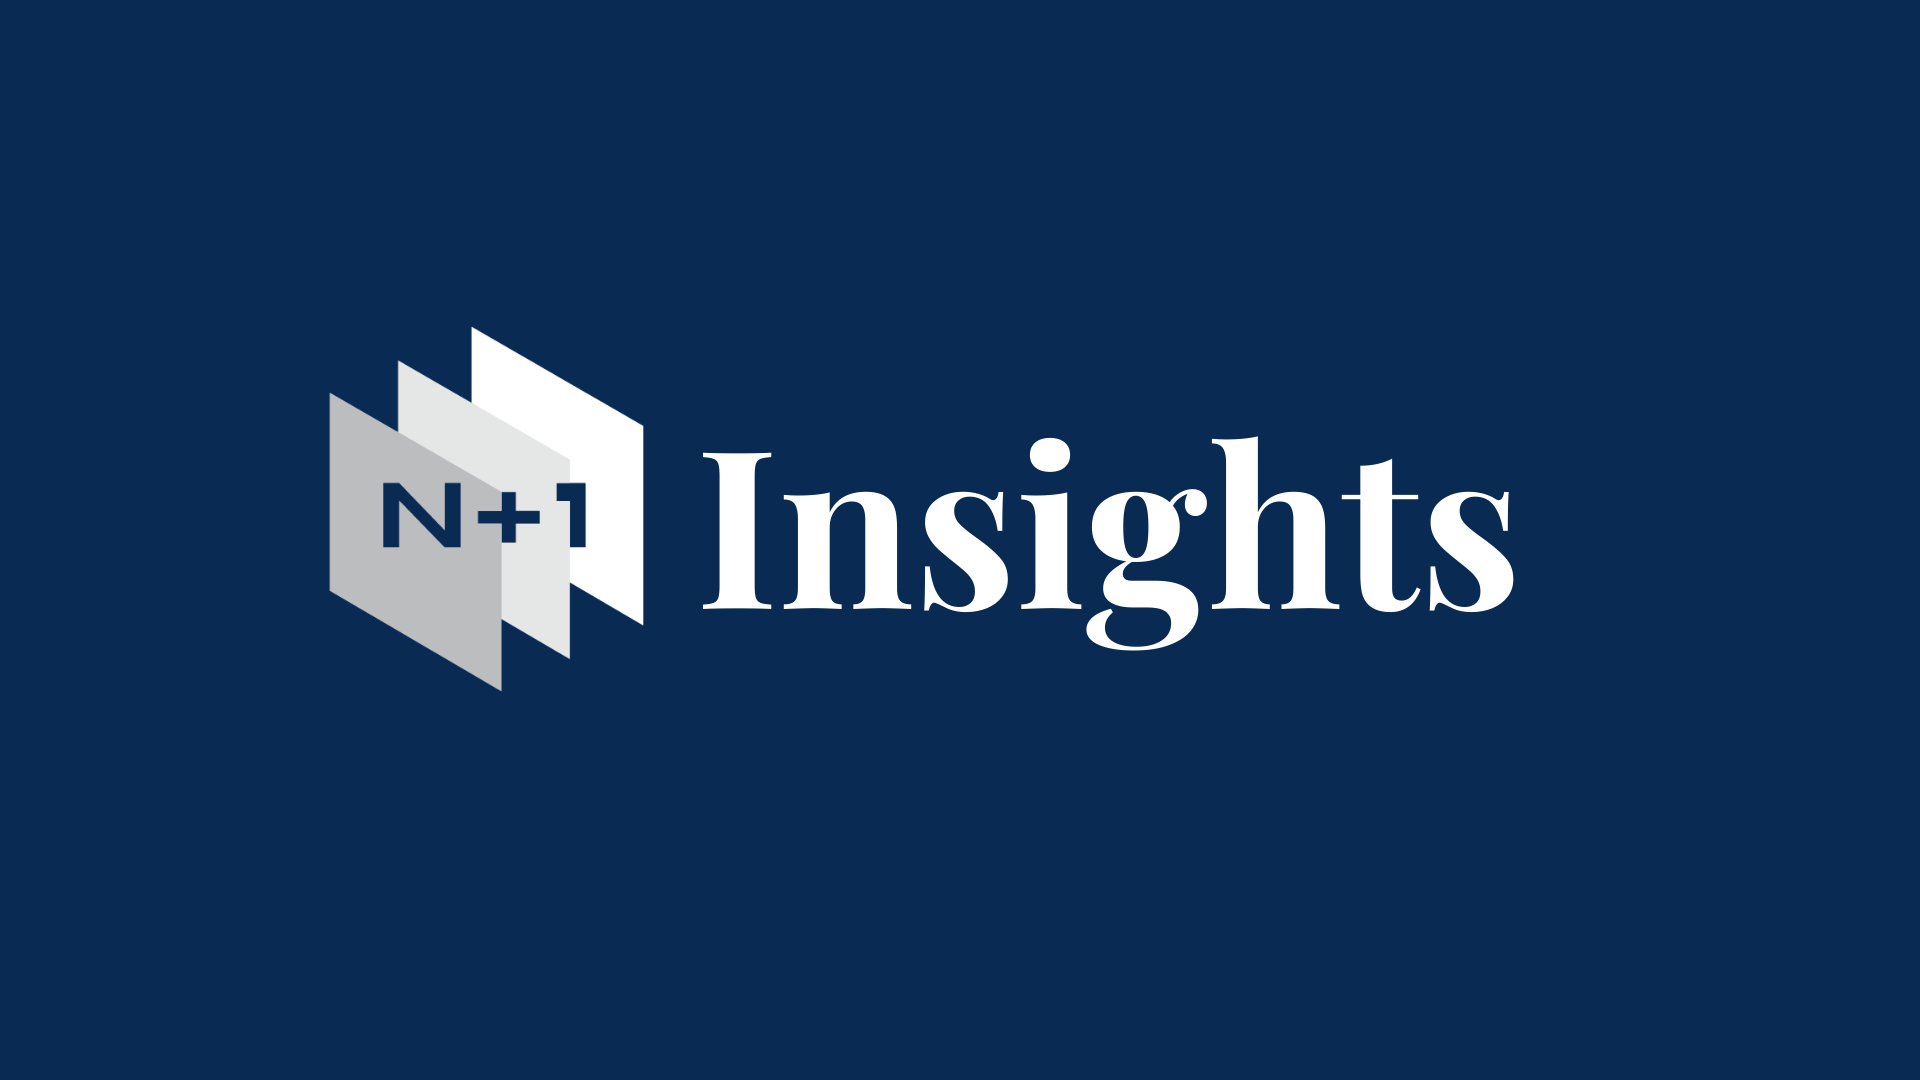 Introducing the N+1 Insights Newsletter